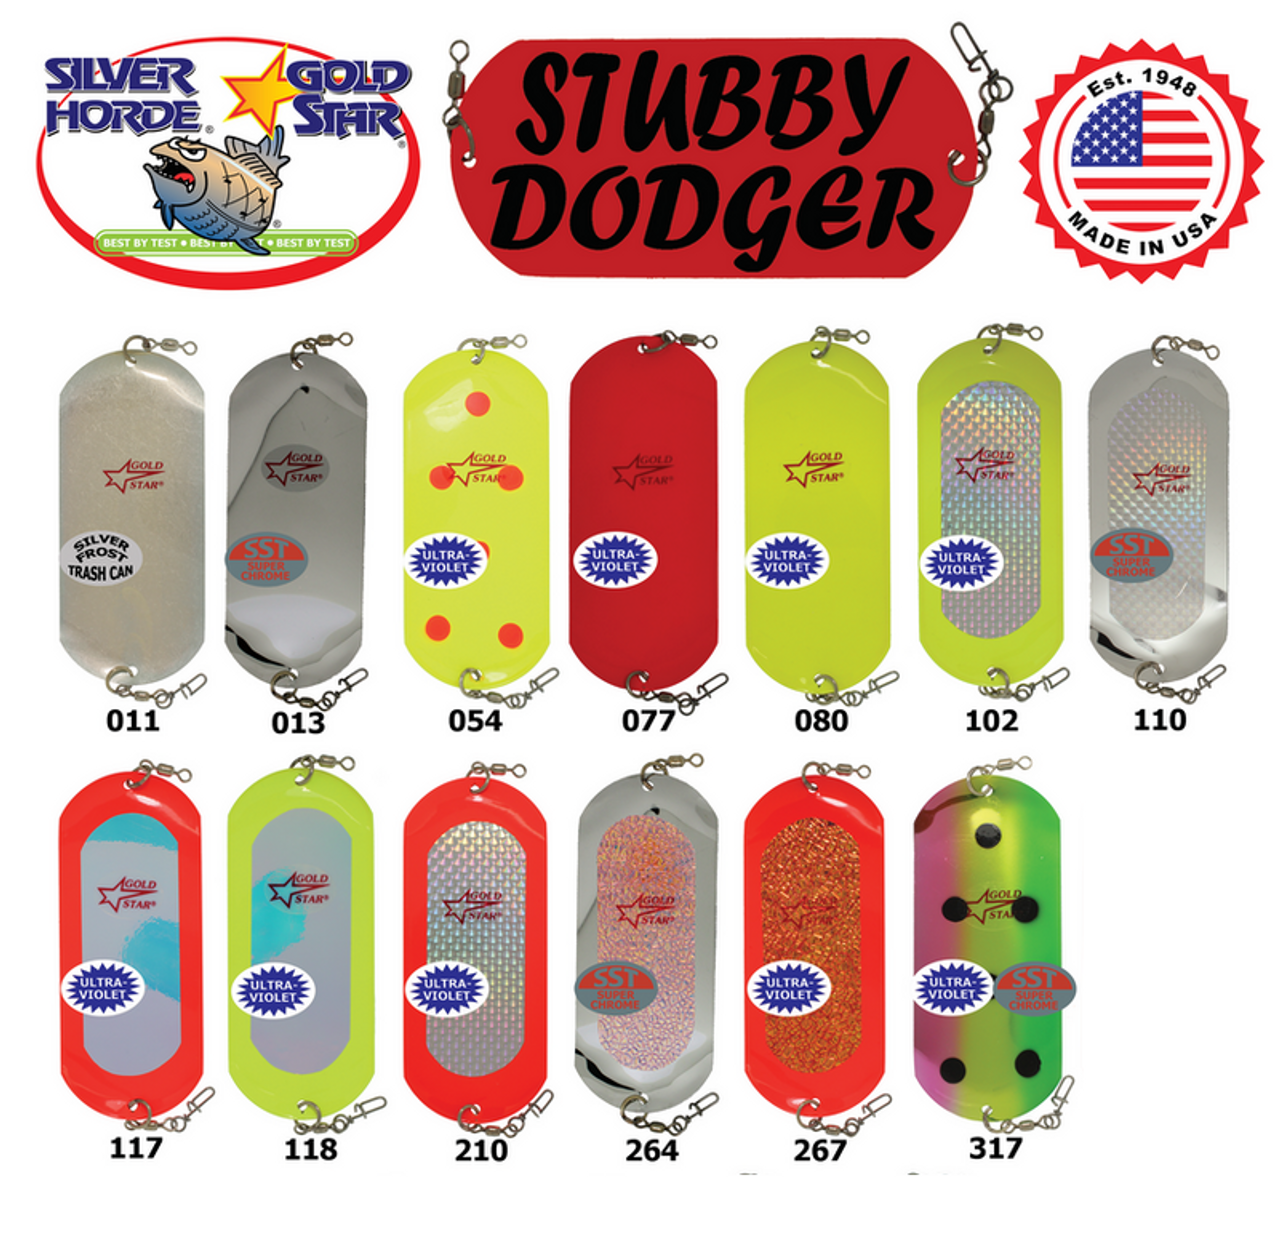 Silver Horde Gold Star Stubby Dodger Size 2-1/2"X 6" 4950 025 Series CHOOSE YOUR COLOR!